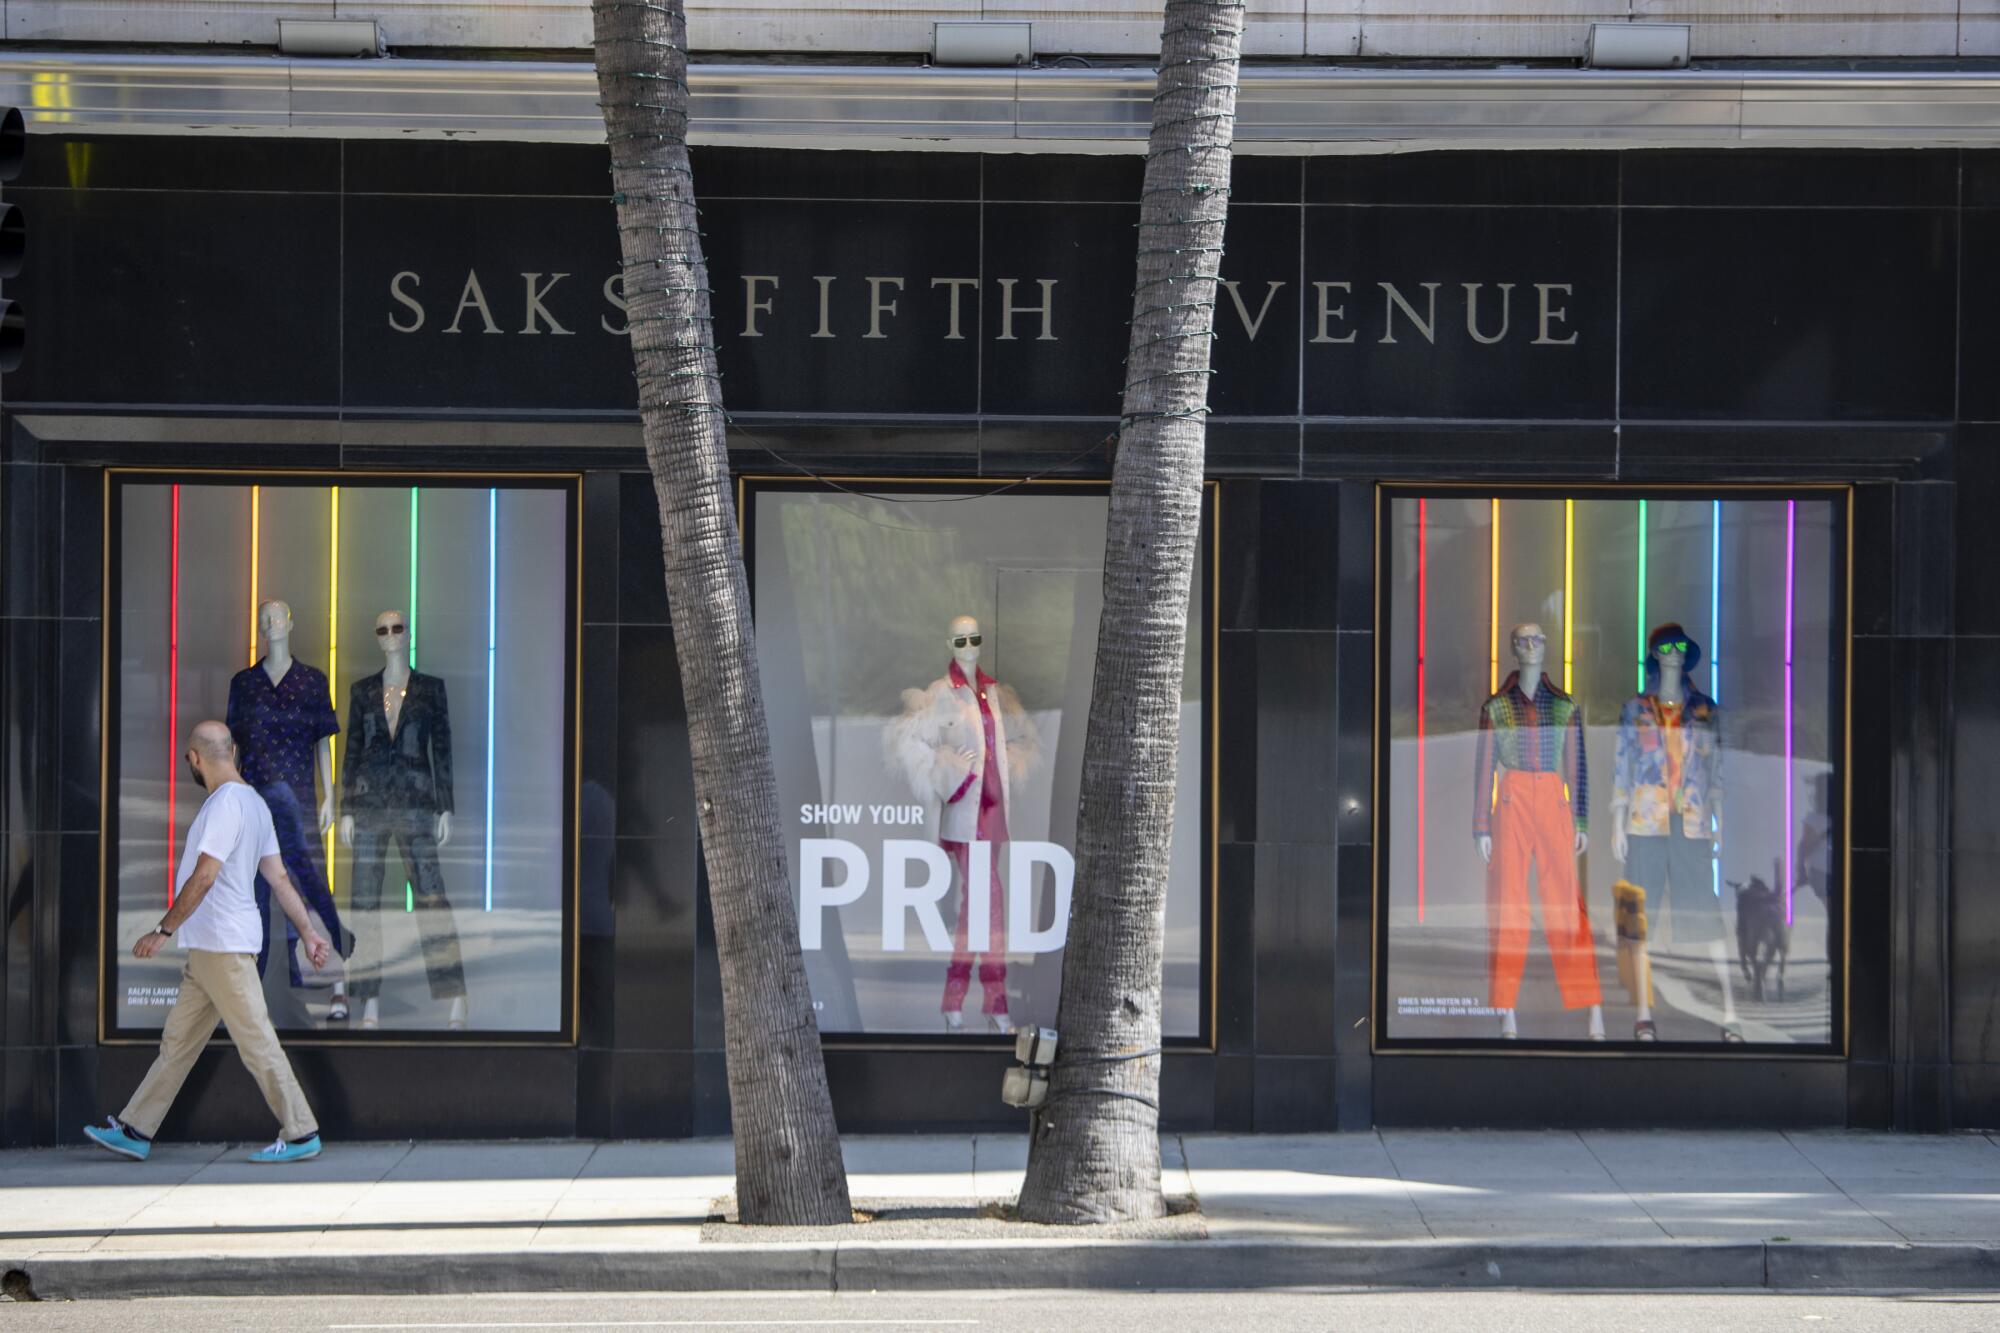 Beverly Hills' historic Saks complex to get offices, apartments